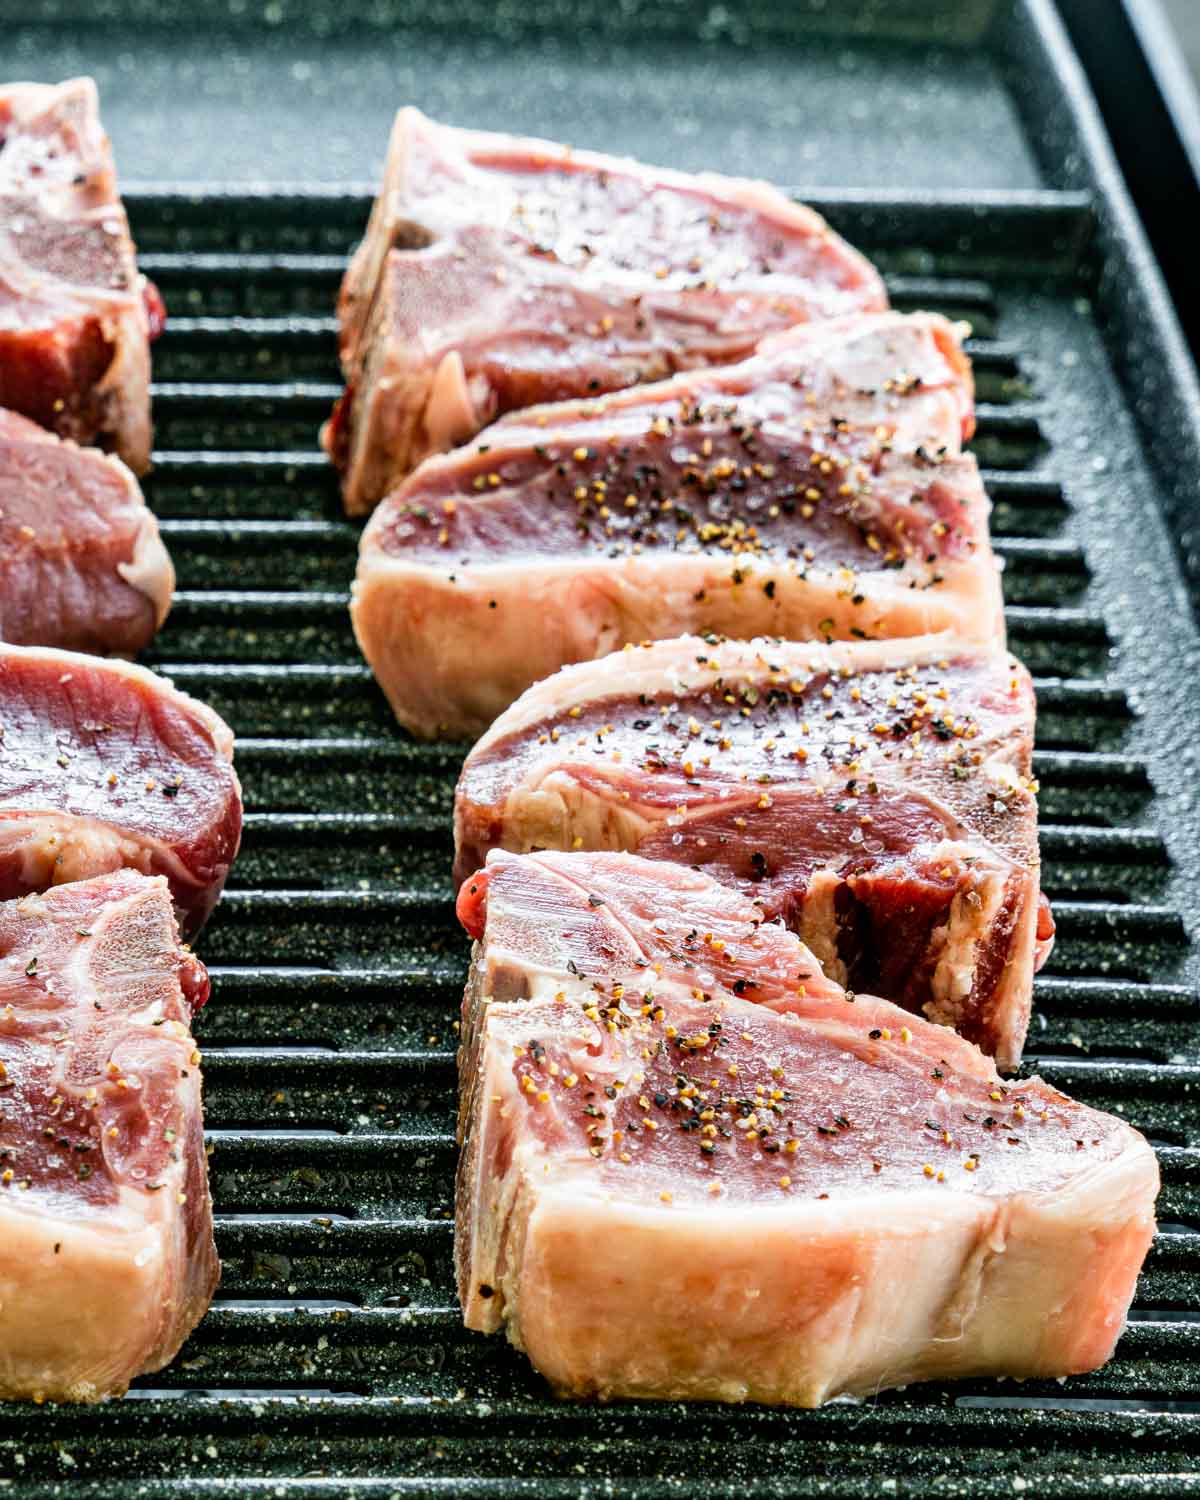 beautiful lamb loin chops on a grill seasoned with salt and pepper